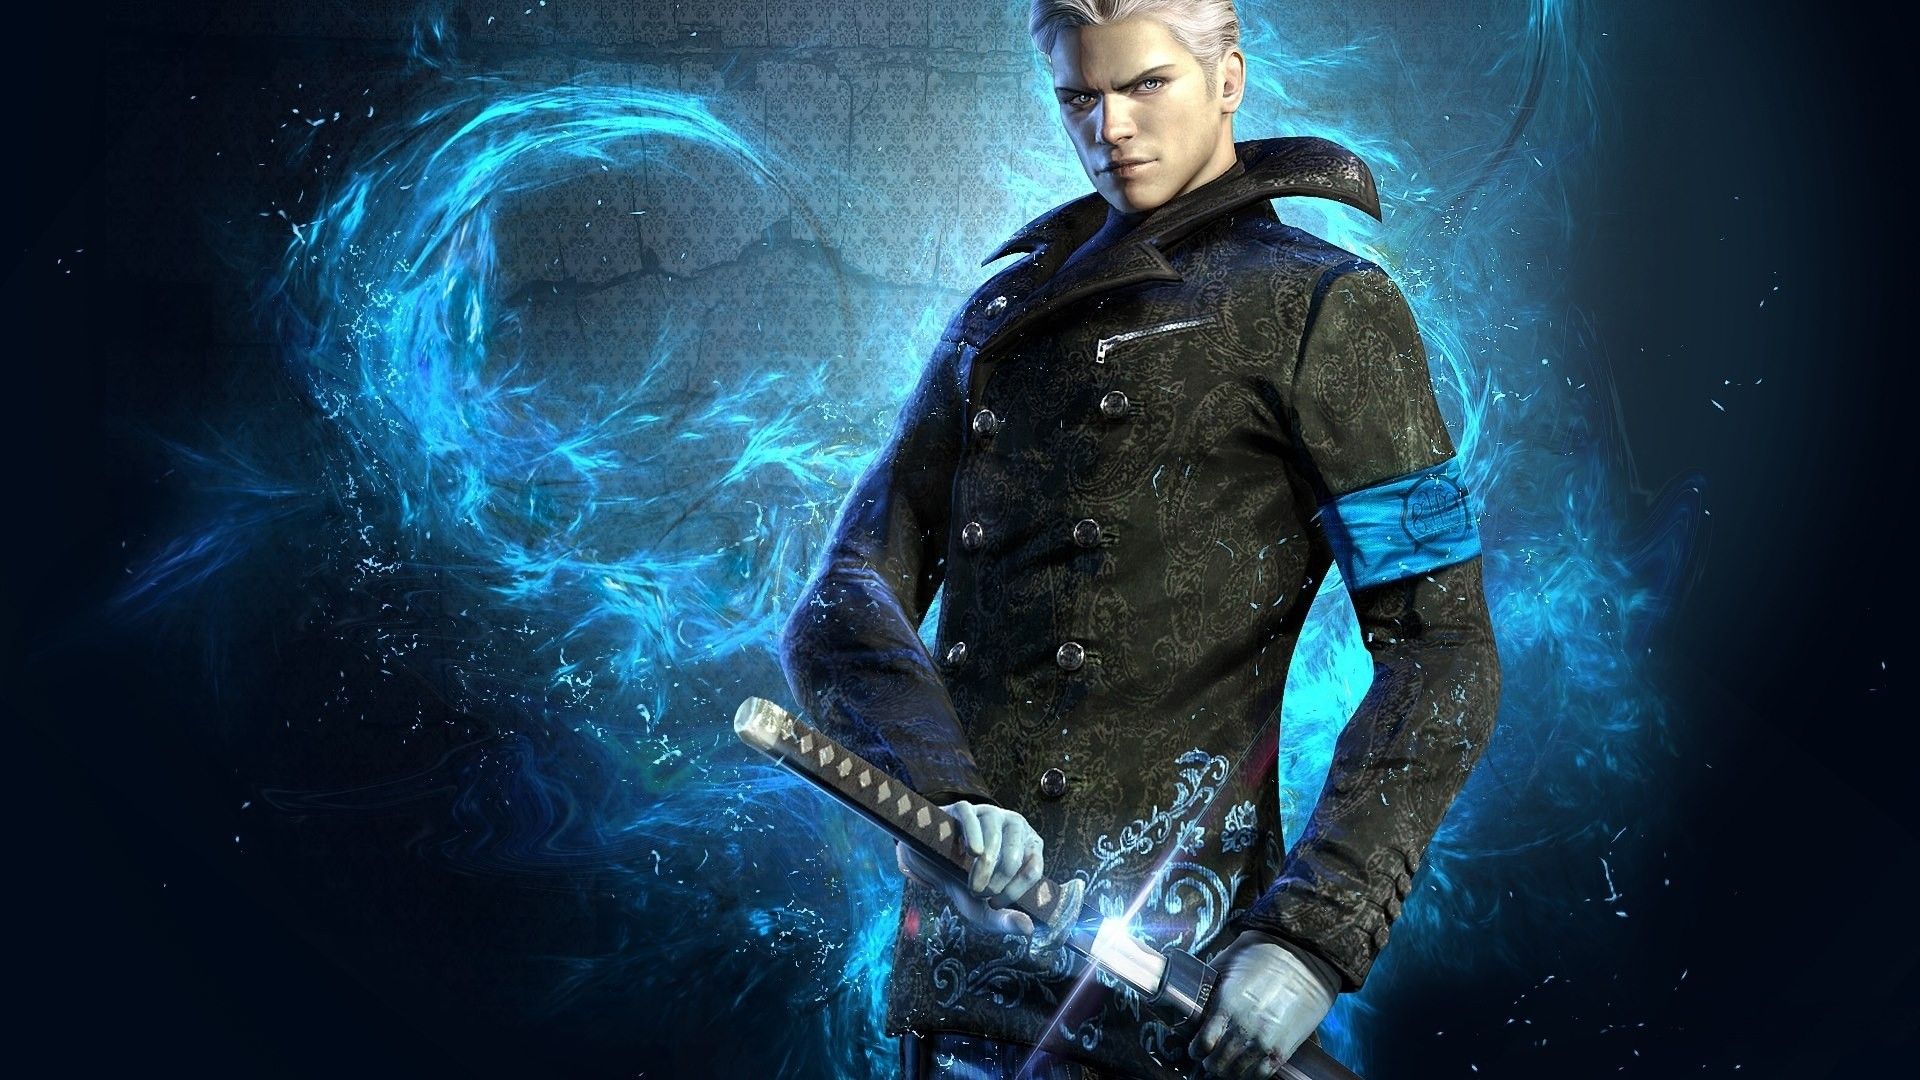 Full HD 1080p Devil may cry Wallpapers HD, Desktop Backgrounds ...